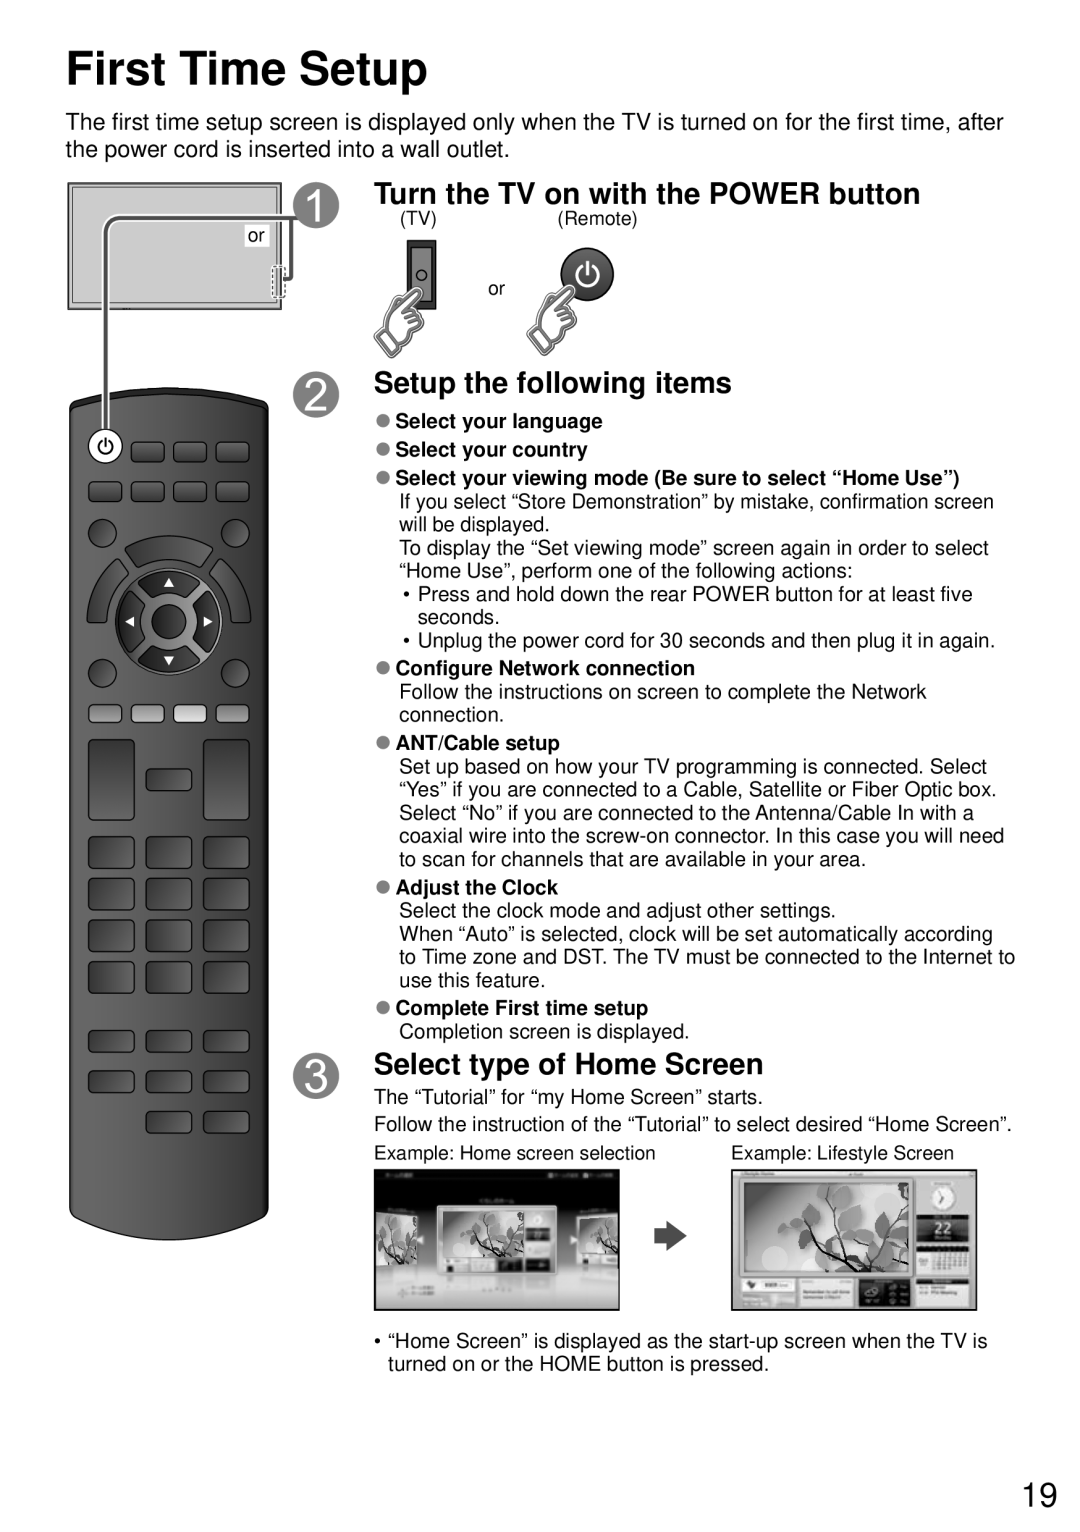 Panasonic TC-P65ST60 First Time Setup, Turn the TV on with the POWER button, Setup the following items, ANT/Cable setup 